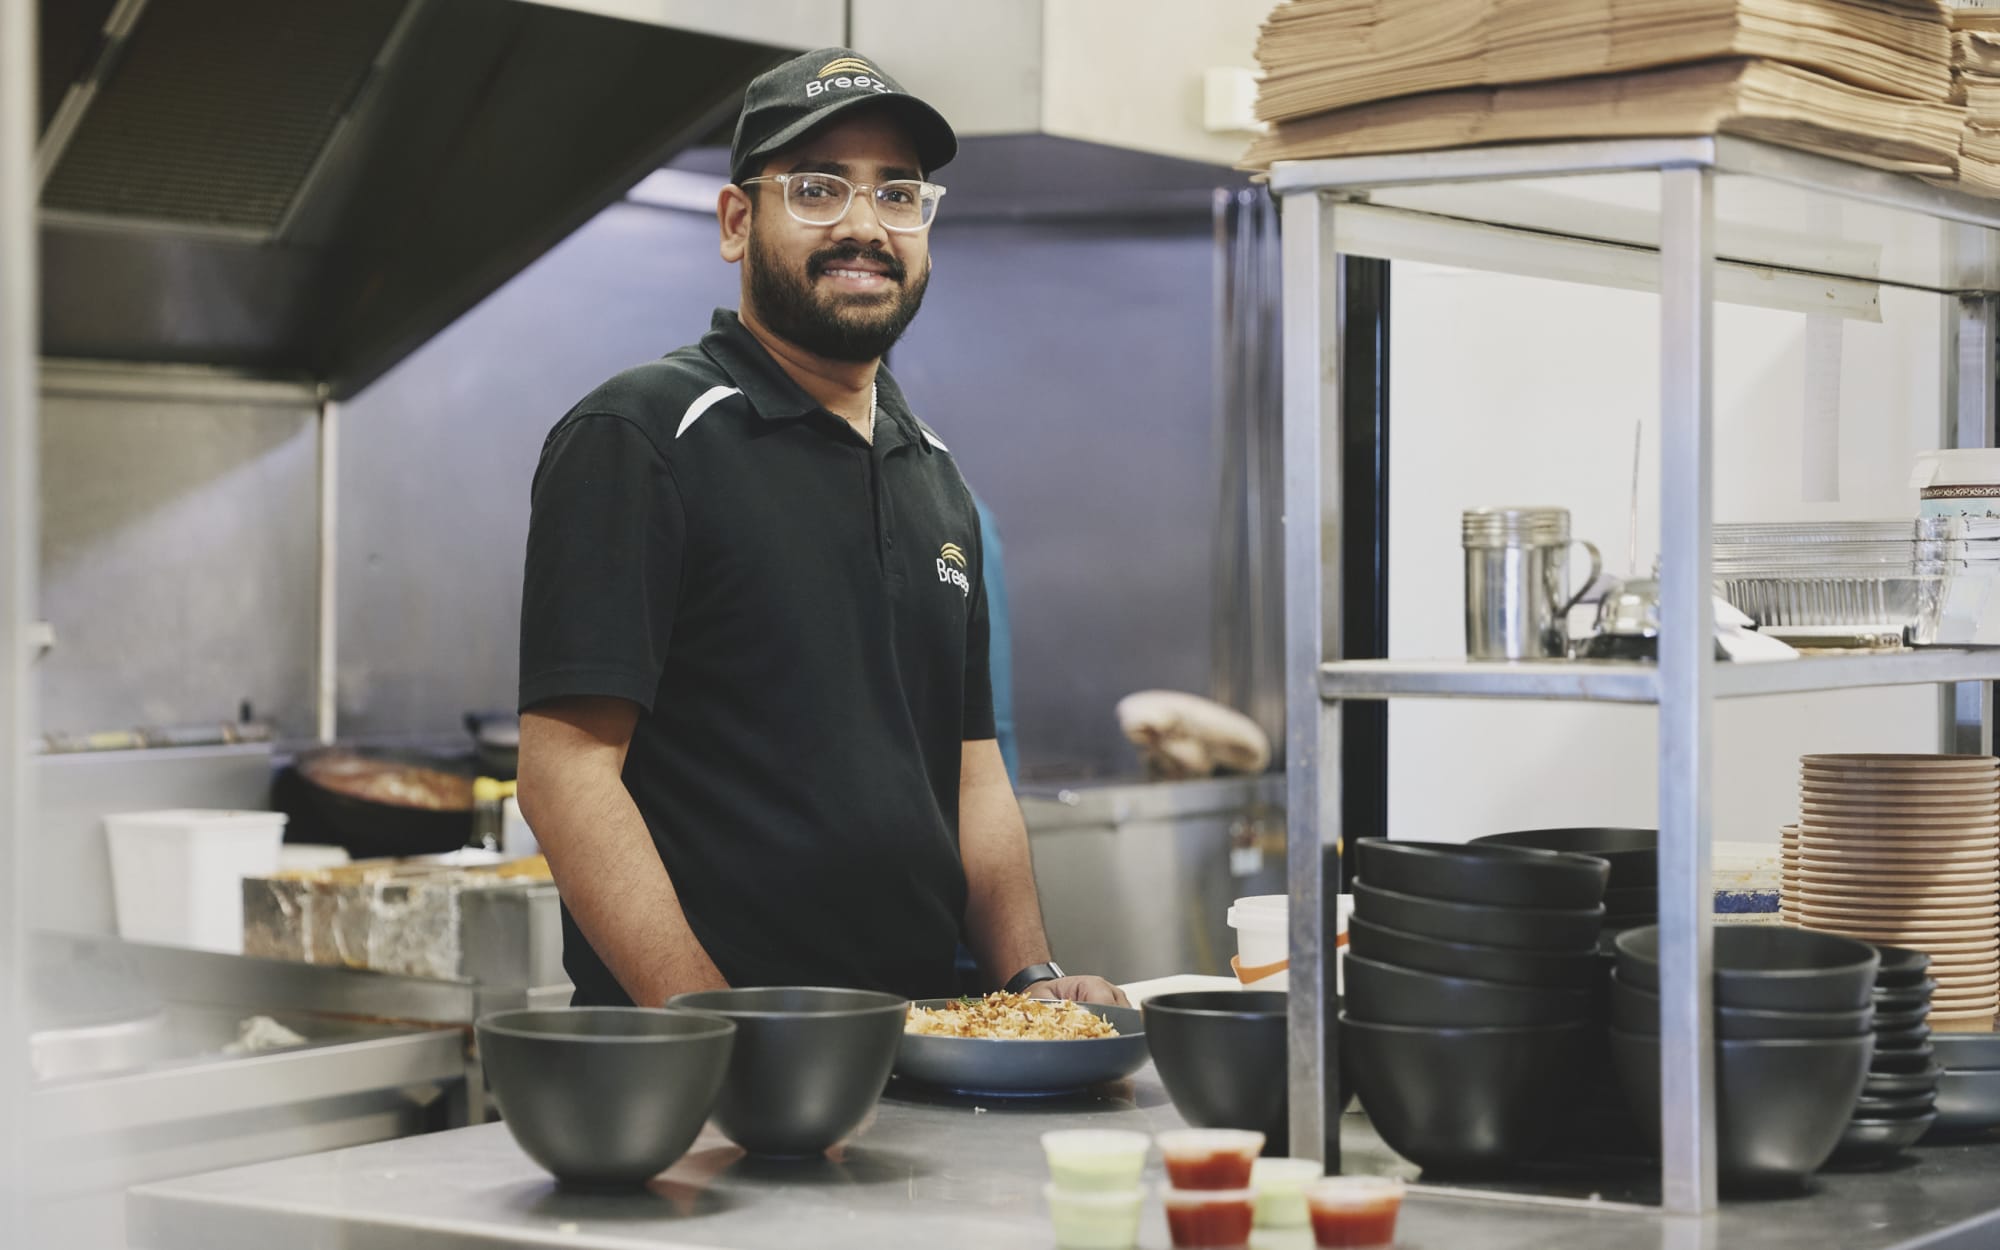 Noor Mohammed Shaikh, wearing a black polo shirt and black cap, poses in the kitchen of his Hamilton restaurant, Breeze.